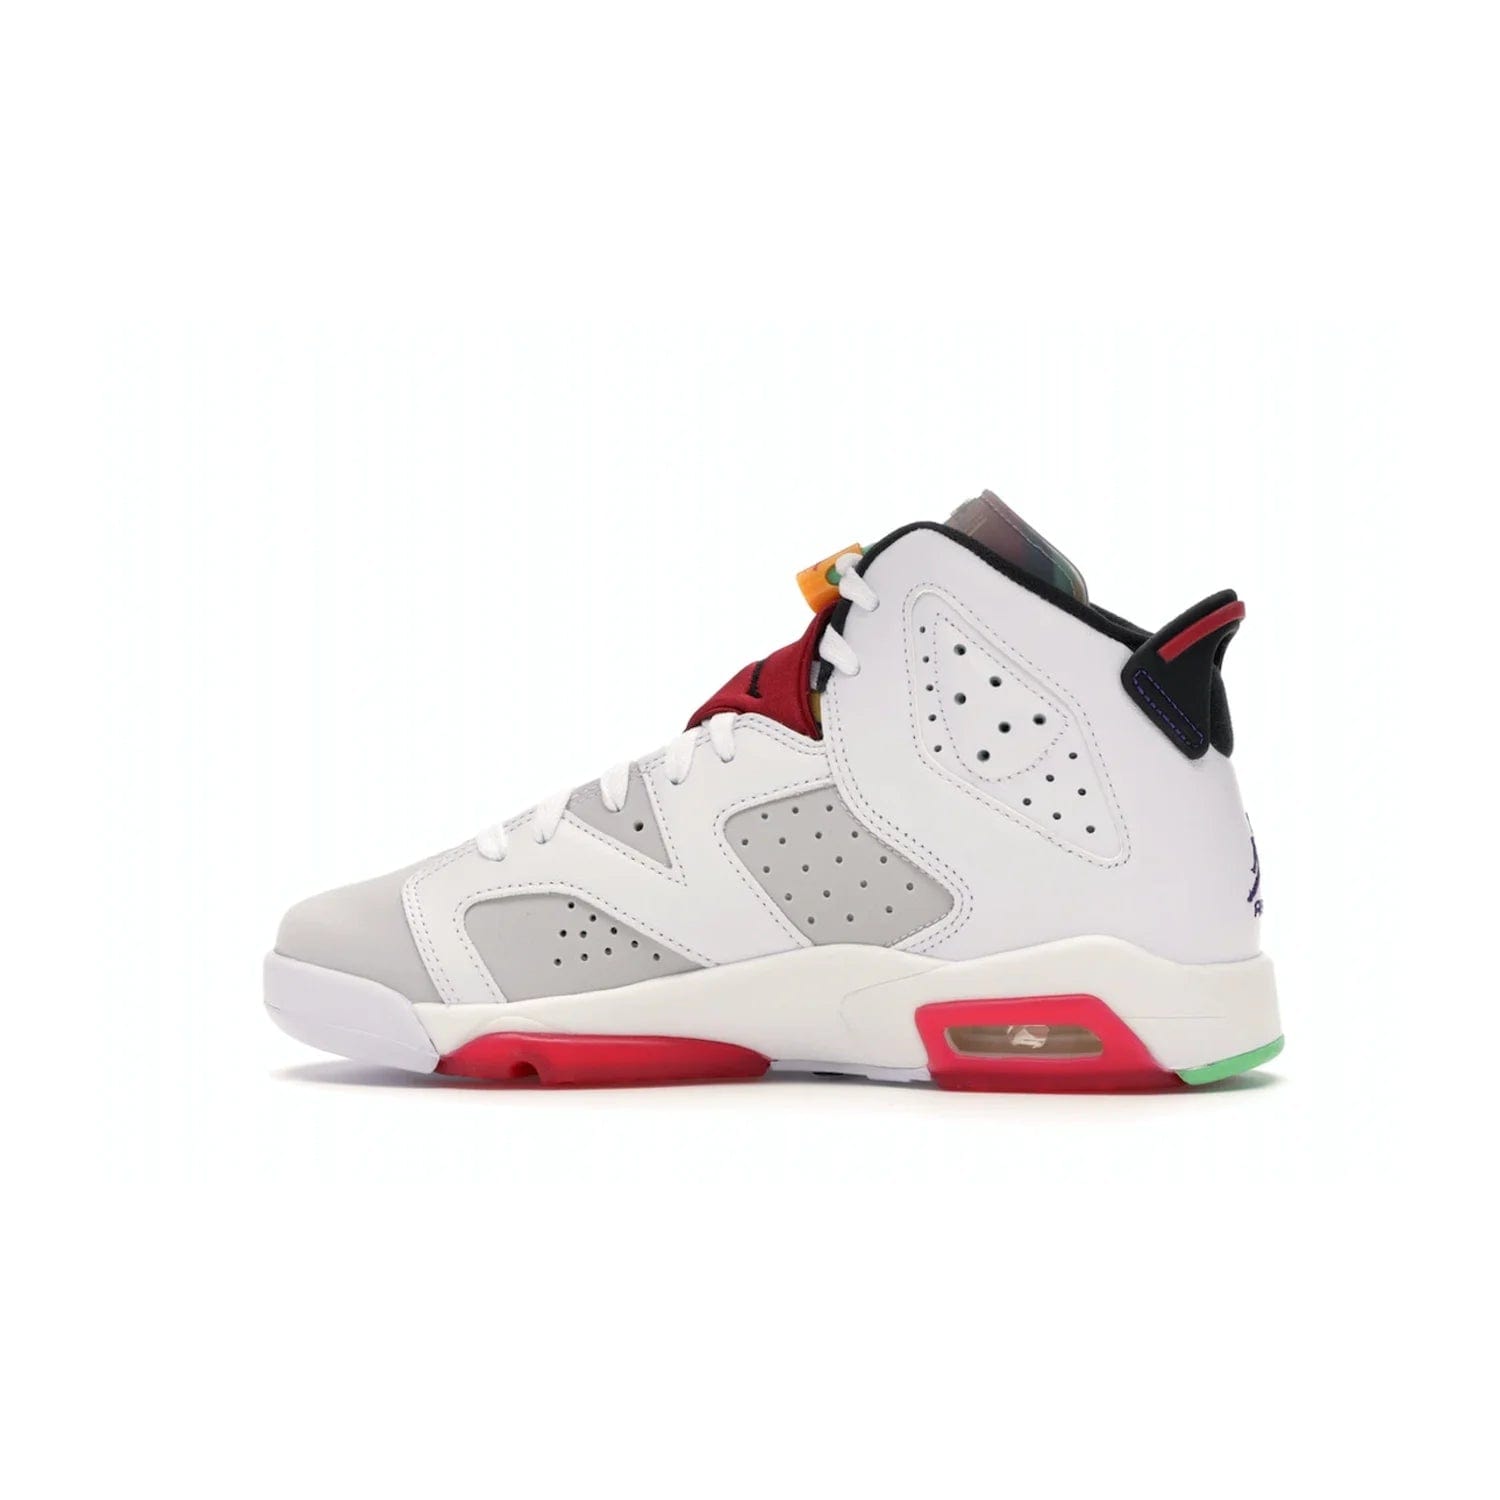 Jordan 6 Retro Hare (GS) - Image 20 - Only at www.BallersClubKickz.com - The Air Jordan 6 Hare GS. Comfortable suede upper, perforations, red pods, two-tone midsole, and signature "Jumpman" emblem. Released 17 June 2020. Perfect for any sneakerhead.